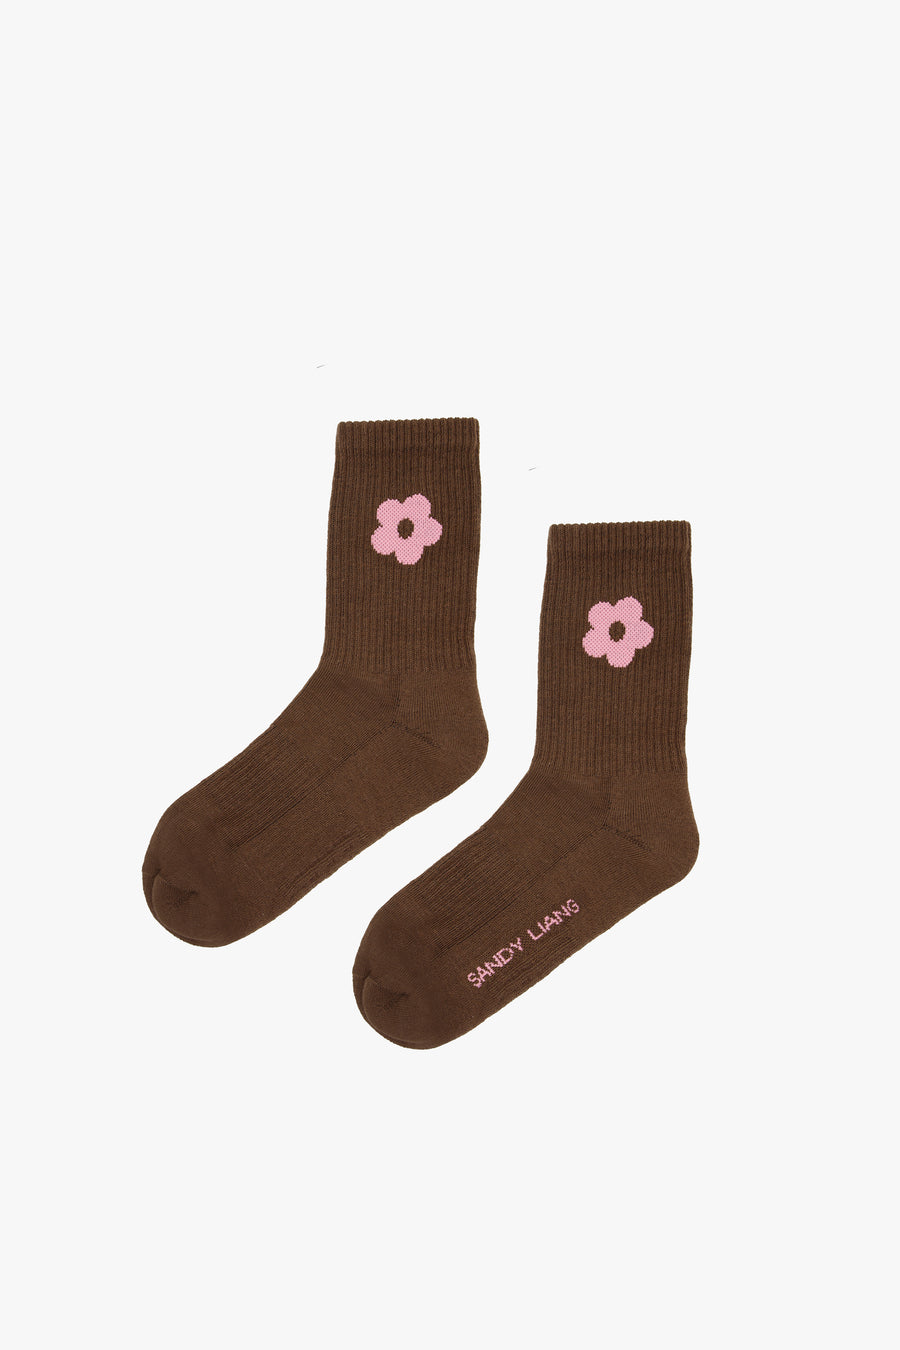 Brown crew length sock with pink flower on either side